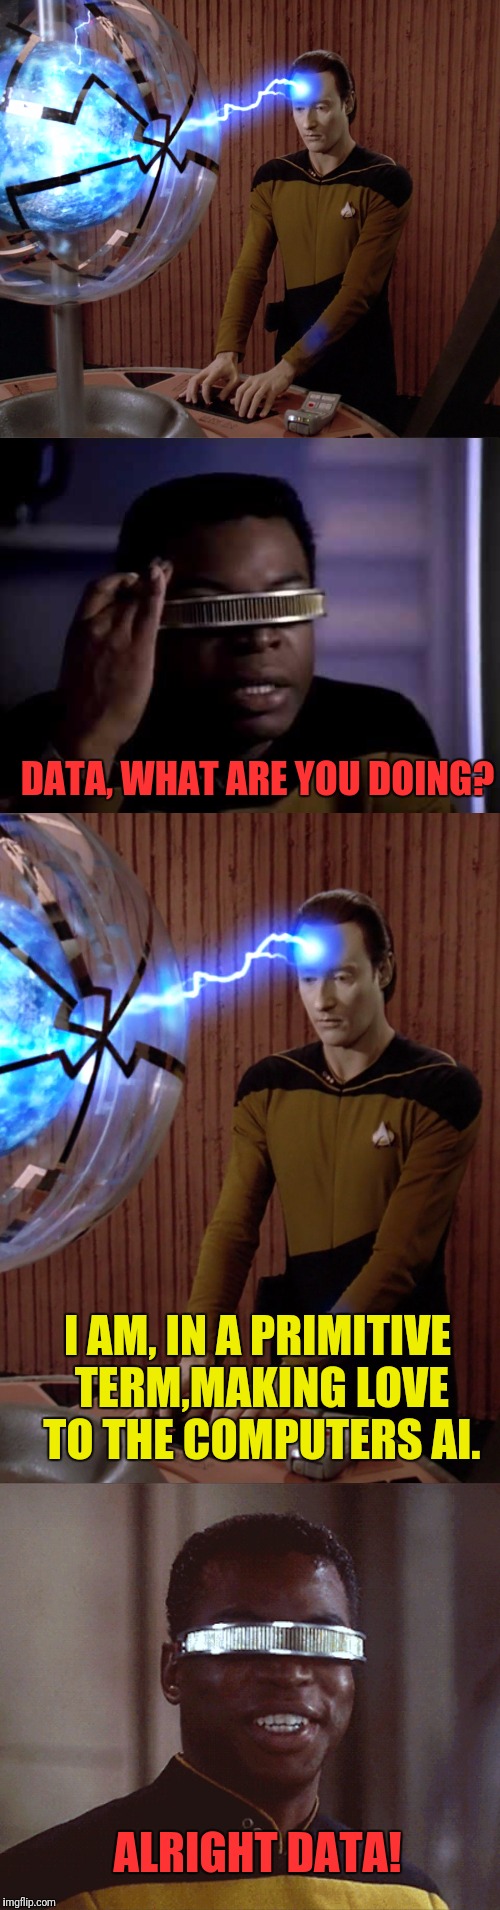 I A.I Love U | DATA, WHAT ARE YOU DOING? I AM, IN A PRIMITIVE TERM,MAKING LOVE TO THE COMPUTERS AI. ALRIGHT DATA! | image tagged in star trek the next generation,data,artificial intelligence,i love you | made w/ Imgflip meme maker